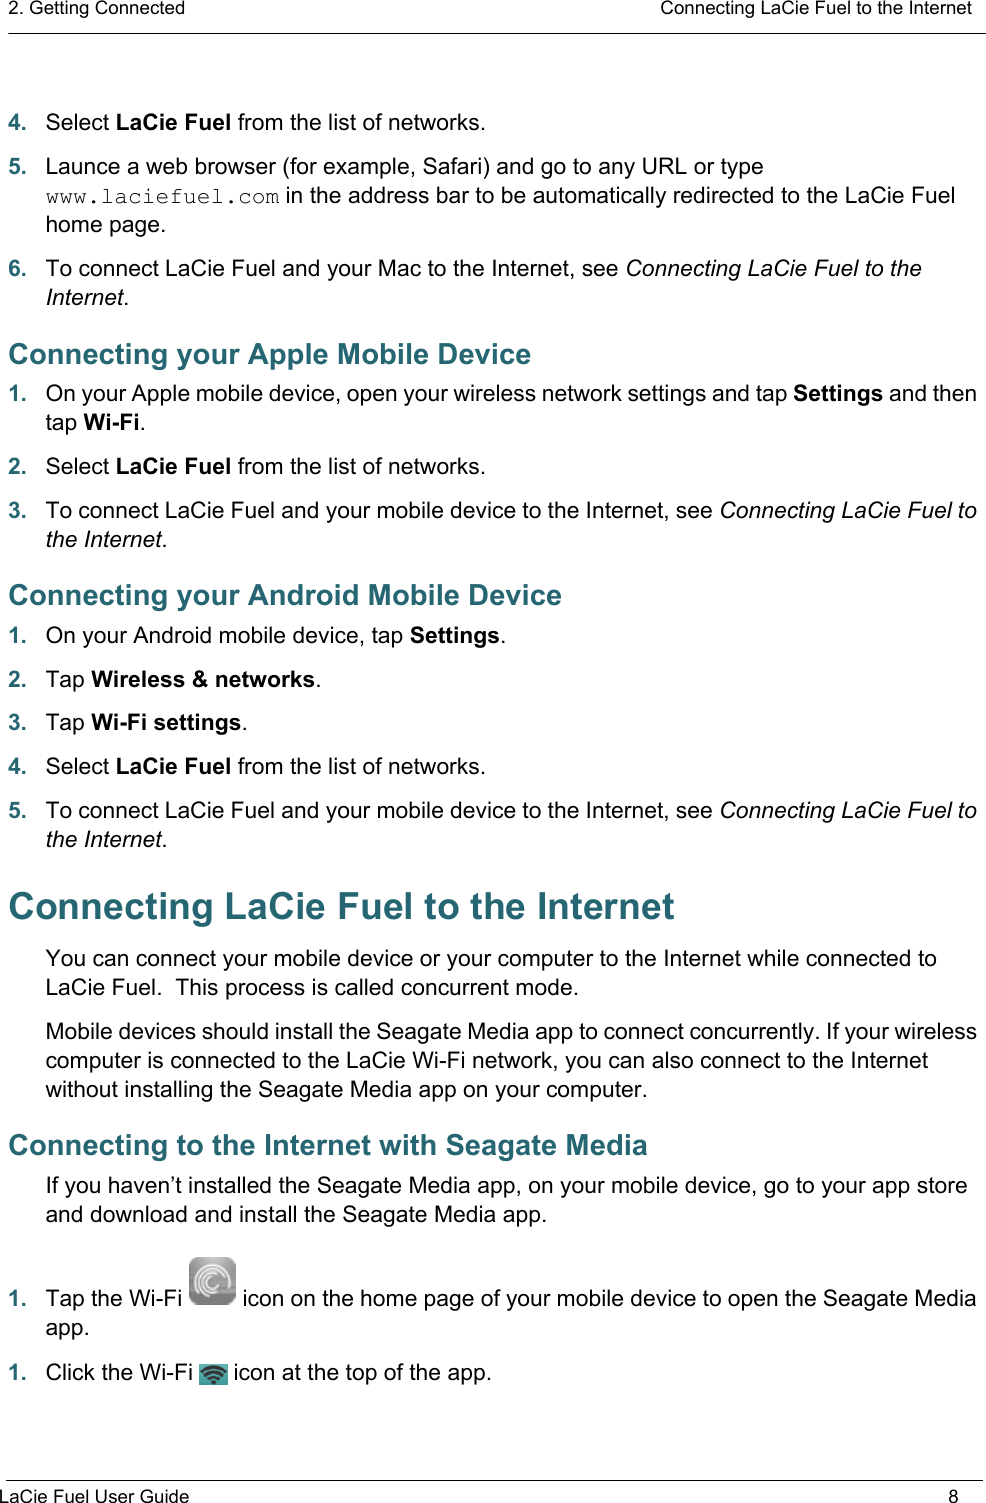 2. Getting Connected  Connecting LaCie Fuel to the InternetLaCie Fuel User Guide 84. Select LaCie Fuel from the list of networks.5. Launce a web browser (for example, Safari) and go to any URL or type www.laciefuel.com in the address bar to be automatically redirected to the LaCie Fuel home page.6. To connect LaCie Fuel and your Mac to the Internet, see Connecting LaCie Fuel to the Internet.Connecting your Apple Mobile Device1. On your Apple mobile device, open your wireless network settings and tap Settings and then tap Wi-Fi.2. Select LaCie Fuel from the list of networks.3. To connect LaCie Fuel and your mobile device to the Internet, see Connecting LaCie Fuel to the Internet.Connecting your Android Mobile Device1. On your Android mobile device, tap Settings.2. Tap Wireless &amp; networks.3. Tap Wi-Fi settings.4. Select LaCie Fuel from the list of networks.5. To connect LaCie Fuel and your mobile device to the Internet, see Connecting LaCie Fuel to the Internet.Connecting LaCie Fuel to the InternetYou can connect your mobile device or your computer to the Internet while connected to LaCie Fuel.  This process is called concurrent mode.Mobile devices should install the Seagate Media app to connect concurrently. If your wireless computer is connected to the LaCie Wi-Fi network, you can also connect to the Internet without installing the Seagate Media app on your computer.Connecting to the Internet with Seagate MediaIf you haven’t installed the Seagate Media app, on your mobile device, go to your app store and download and install the Seagate Media app.1. Tap the Wi-Fi icon on the home page of your mobile device to open the Seagate Media app.1. Click the Wi-Fi icon at the top of the app.